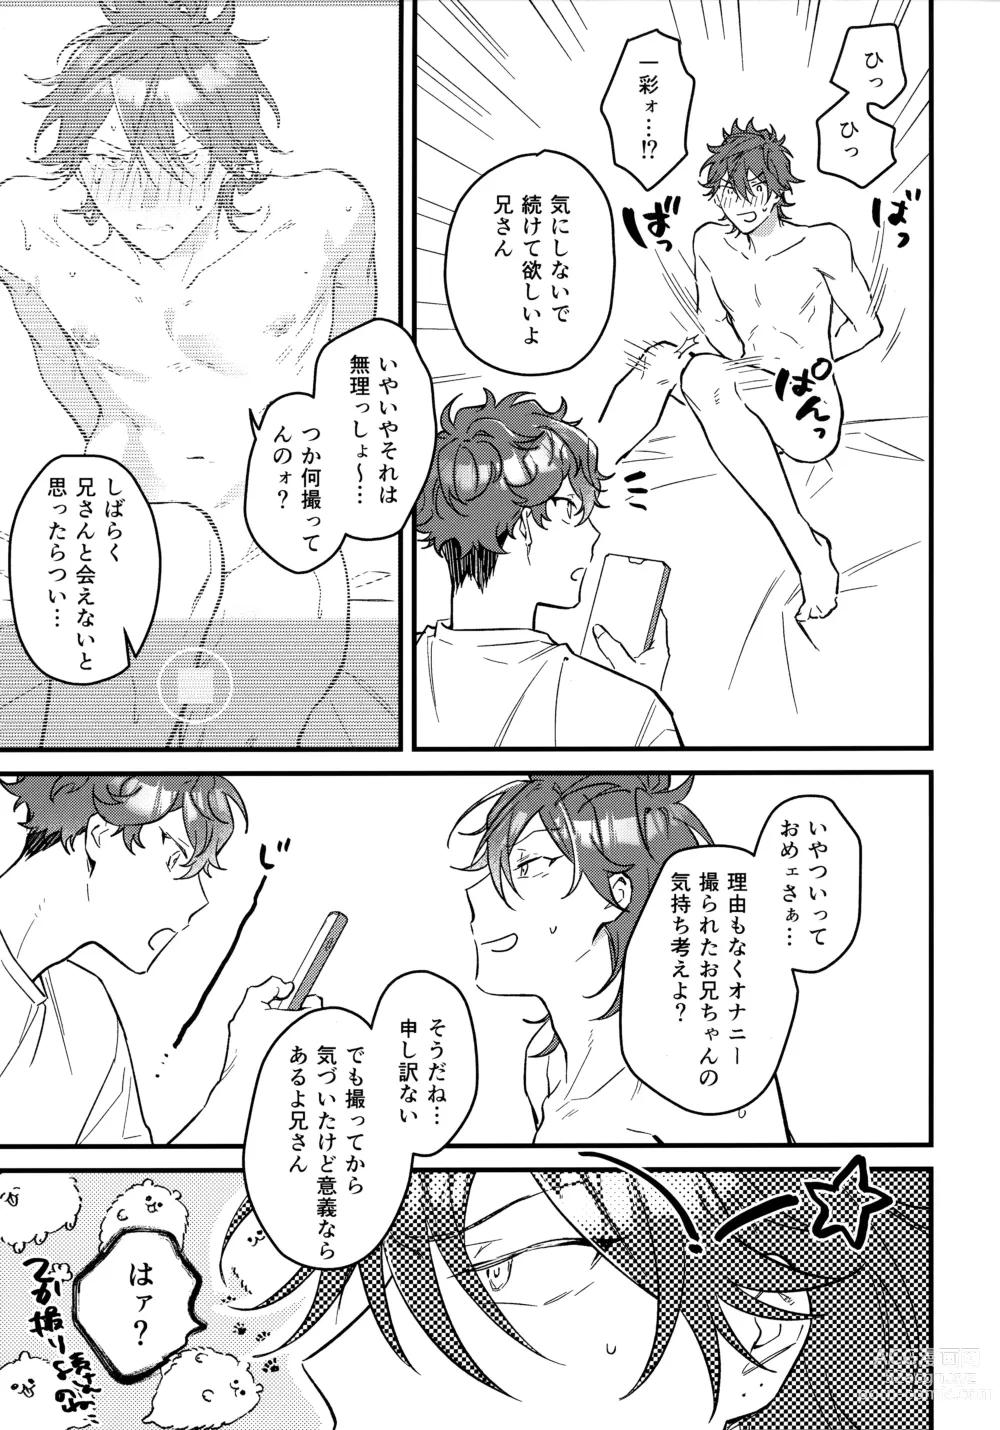 Page 8 of doujinshi H.M.D.R.